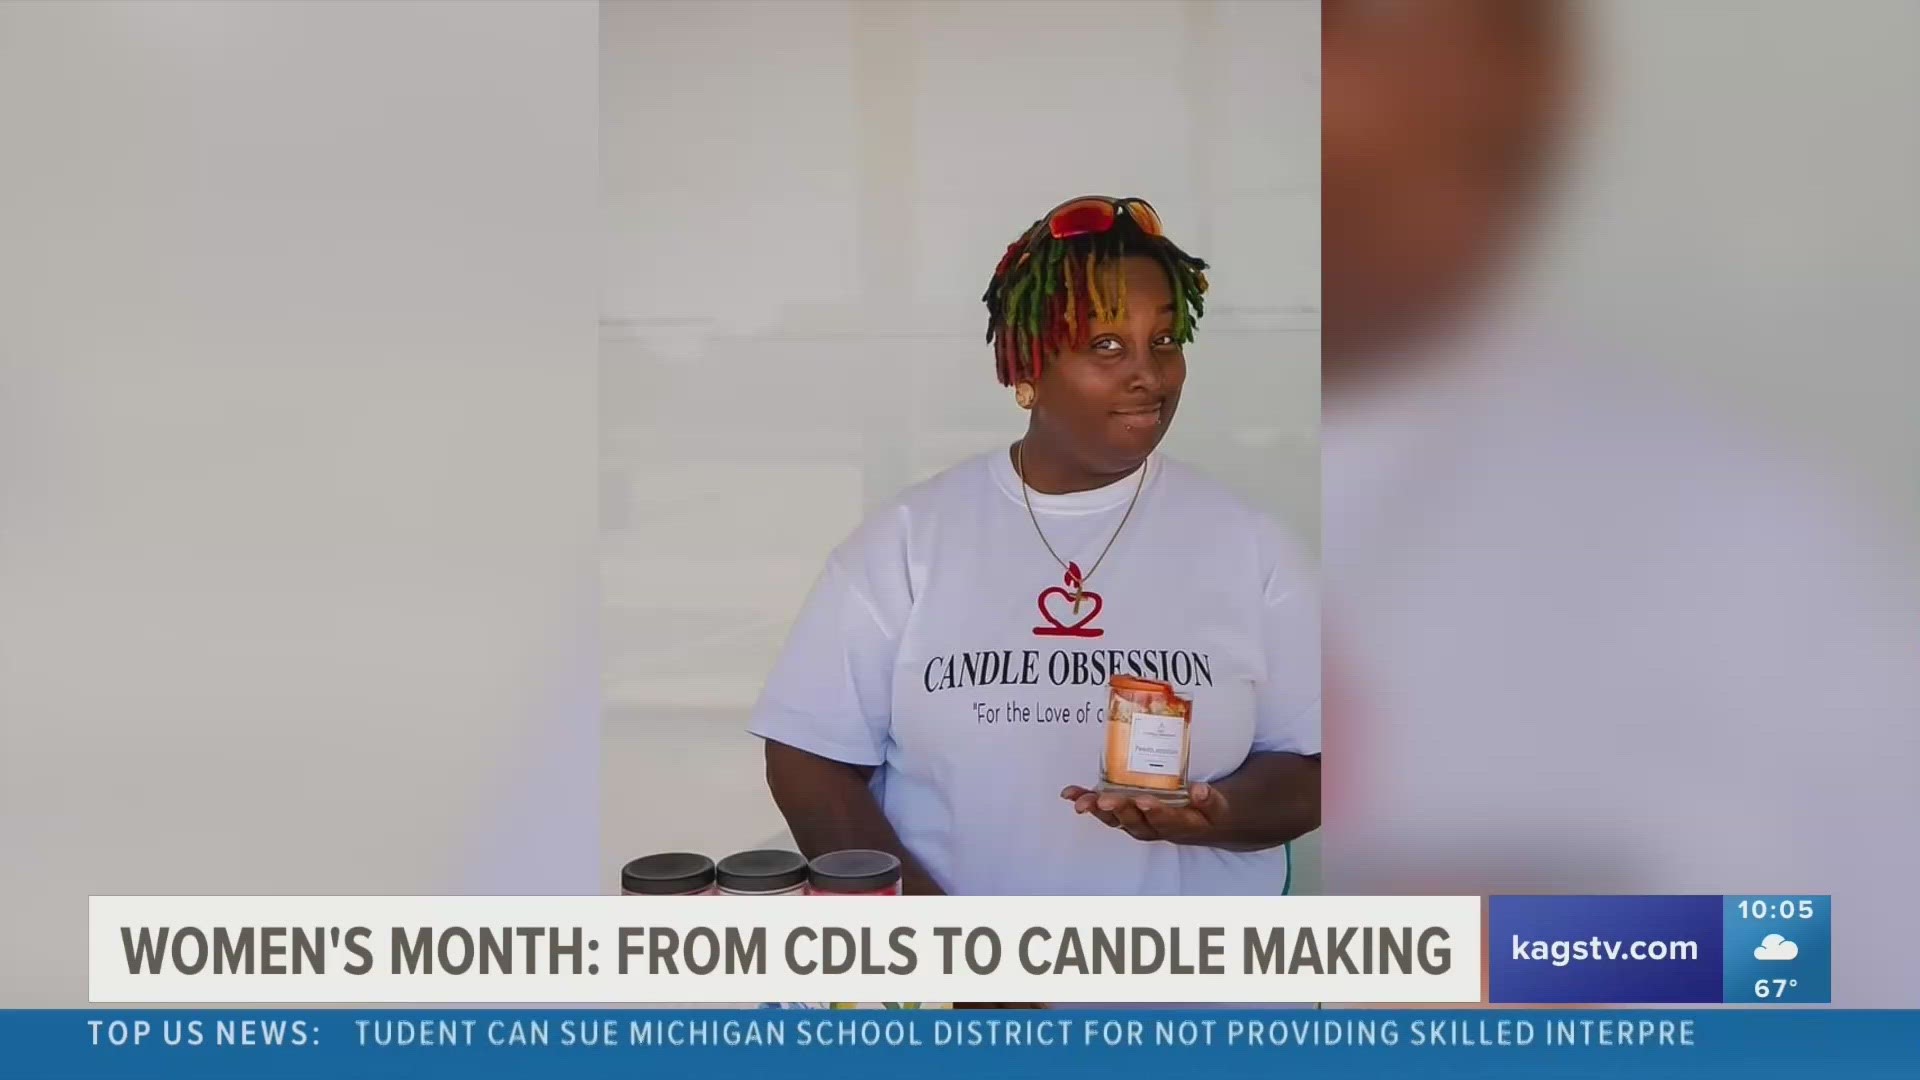 Felicia McKinney looks back on her journey from being a CDL truck driver to now a candlemaker that allows her to manifest her creative spirit into her products.